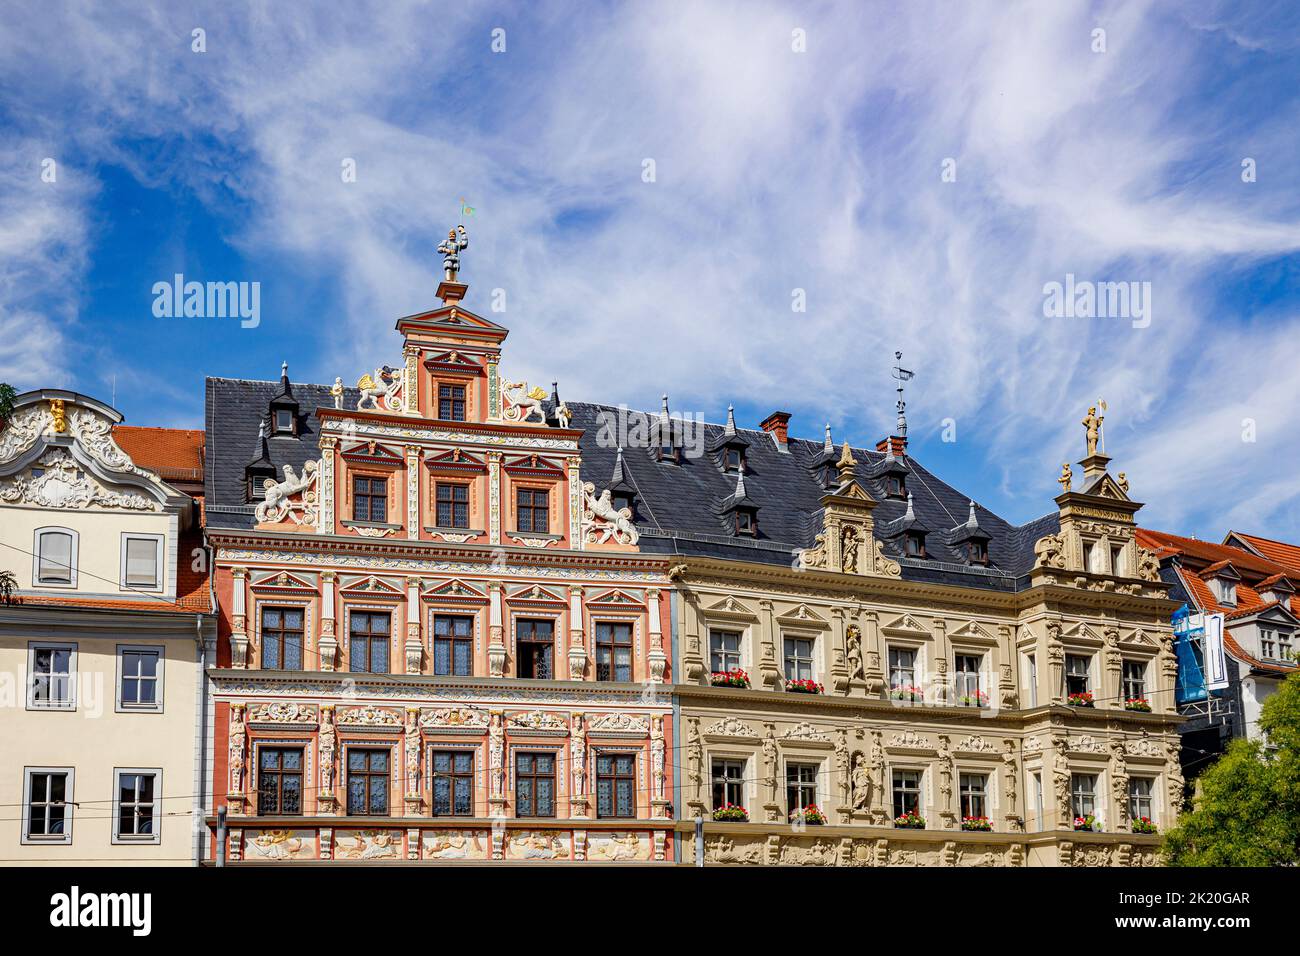 Façade Of The Chamber Of Crafts In Erfurt At The Fish Market, Thuringia, Germany, Europe Stock Photo